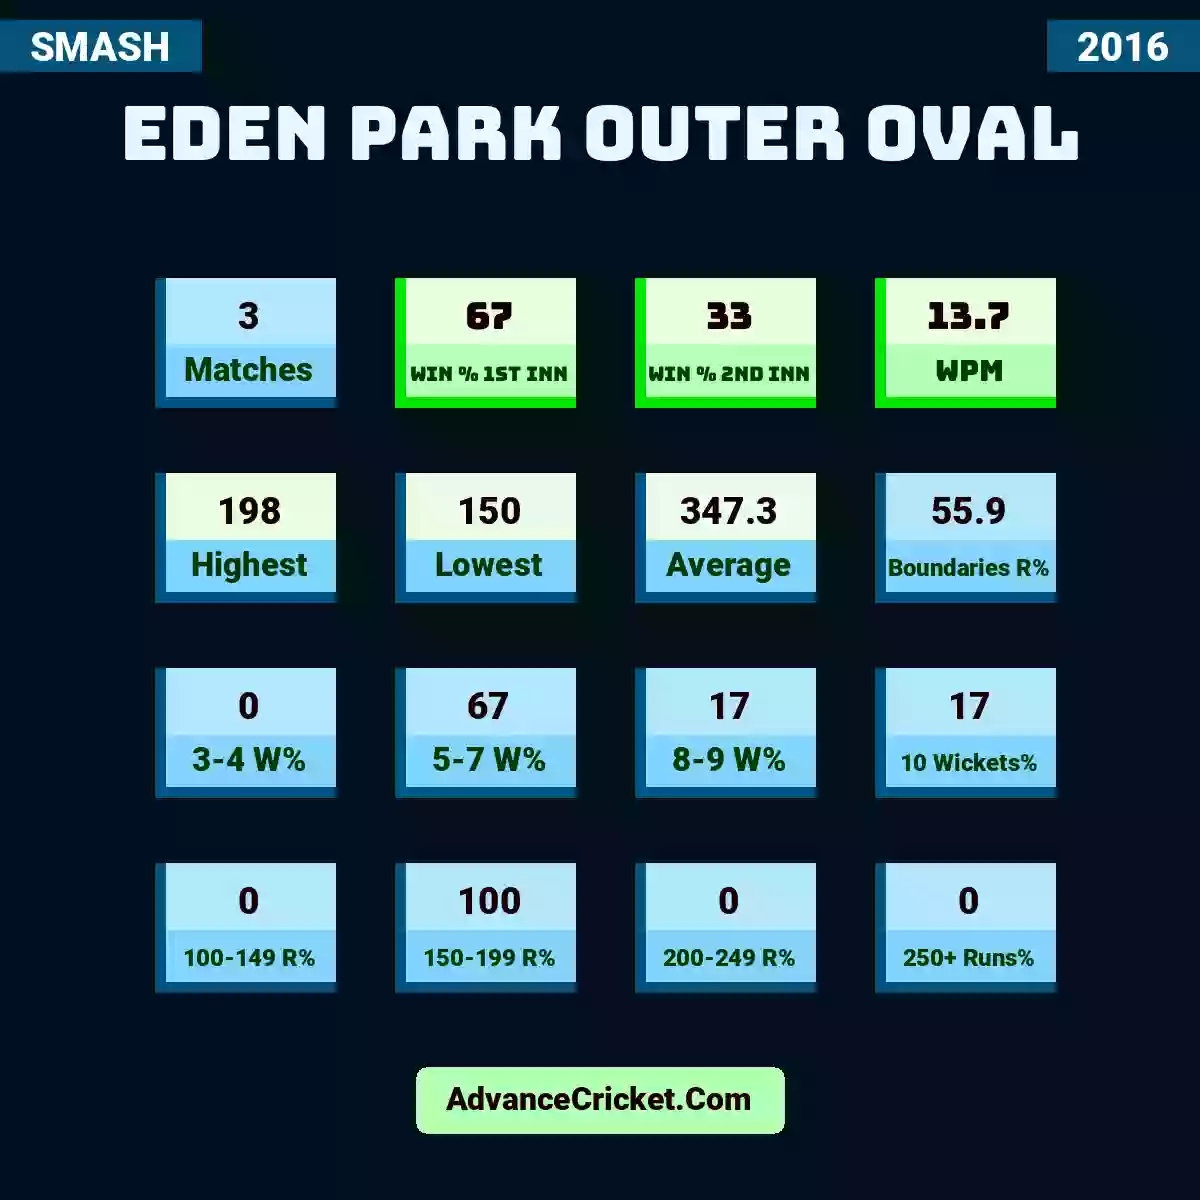 Image showing Eden Park Outer Oval with Matches: 3, Win % 1st Inn: 67, Win % 2nd Inn: 33, WPM: 13.7, Highest: 198, Lowest: 150, Average: 347.3, Boundaries R%: 55.9, 3-4 W%: 0, 5-7 W%: 67, 8-9 W%: 17, 10 Wickets%: 17, 100-149 R%: 0, 150-199 R%: 100, 200-249 R%: 0, 250+ Runs%: 0.